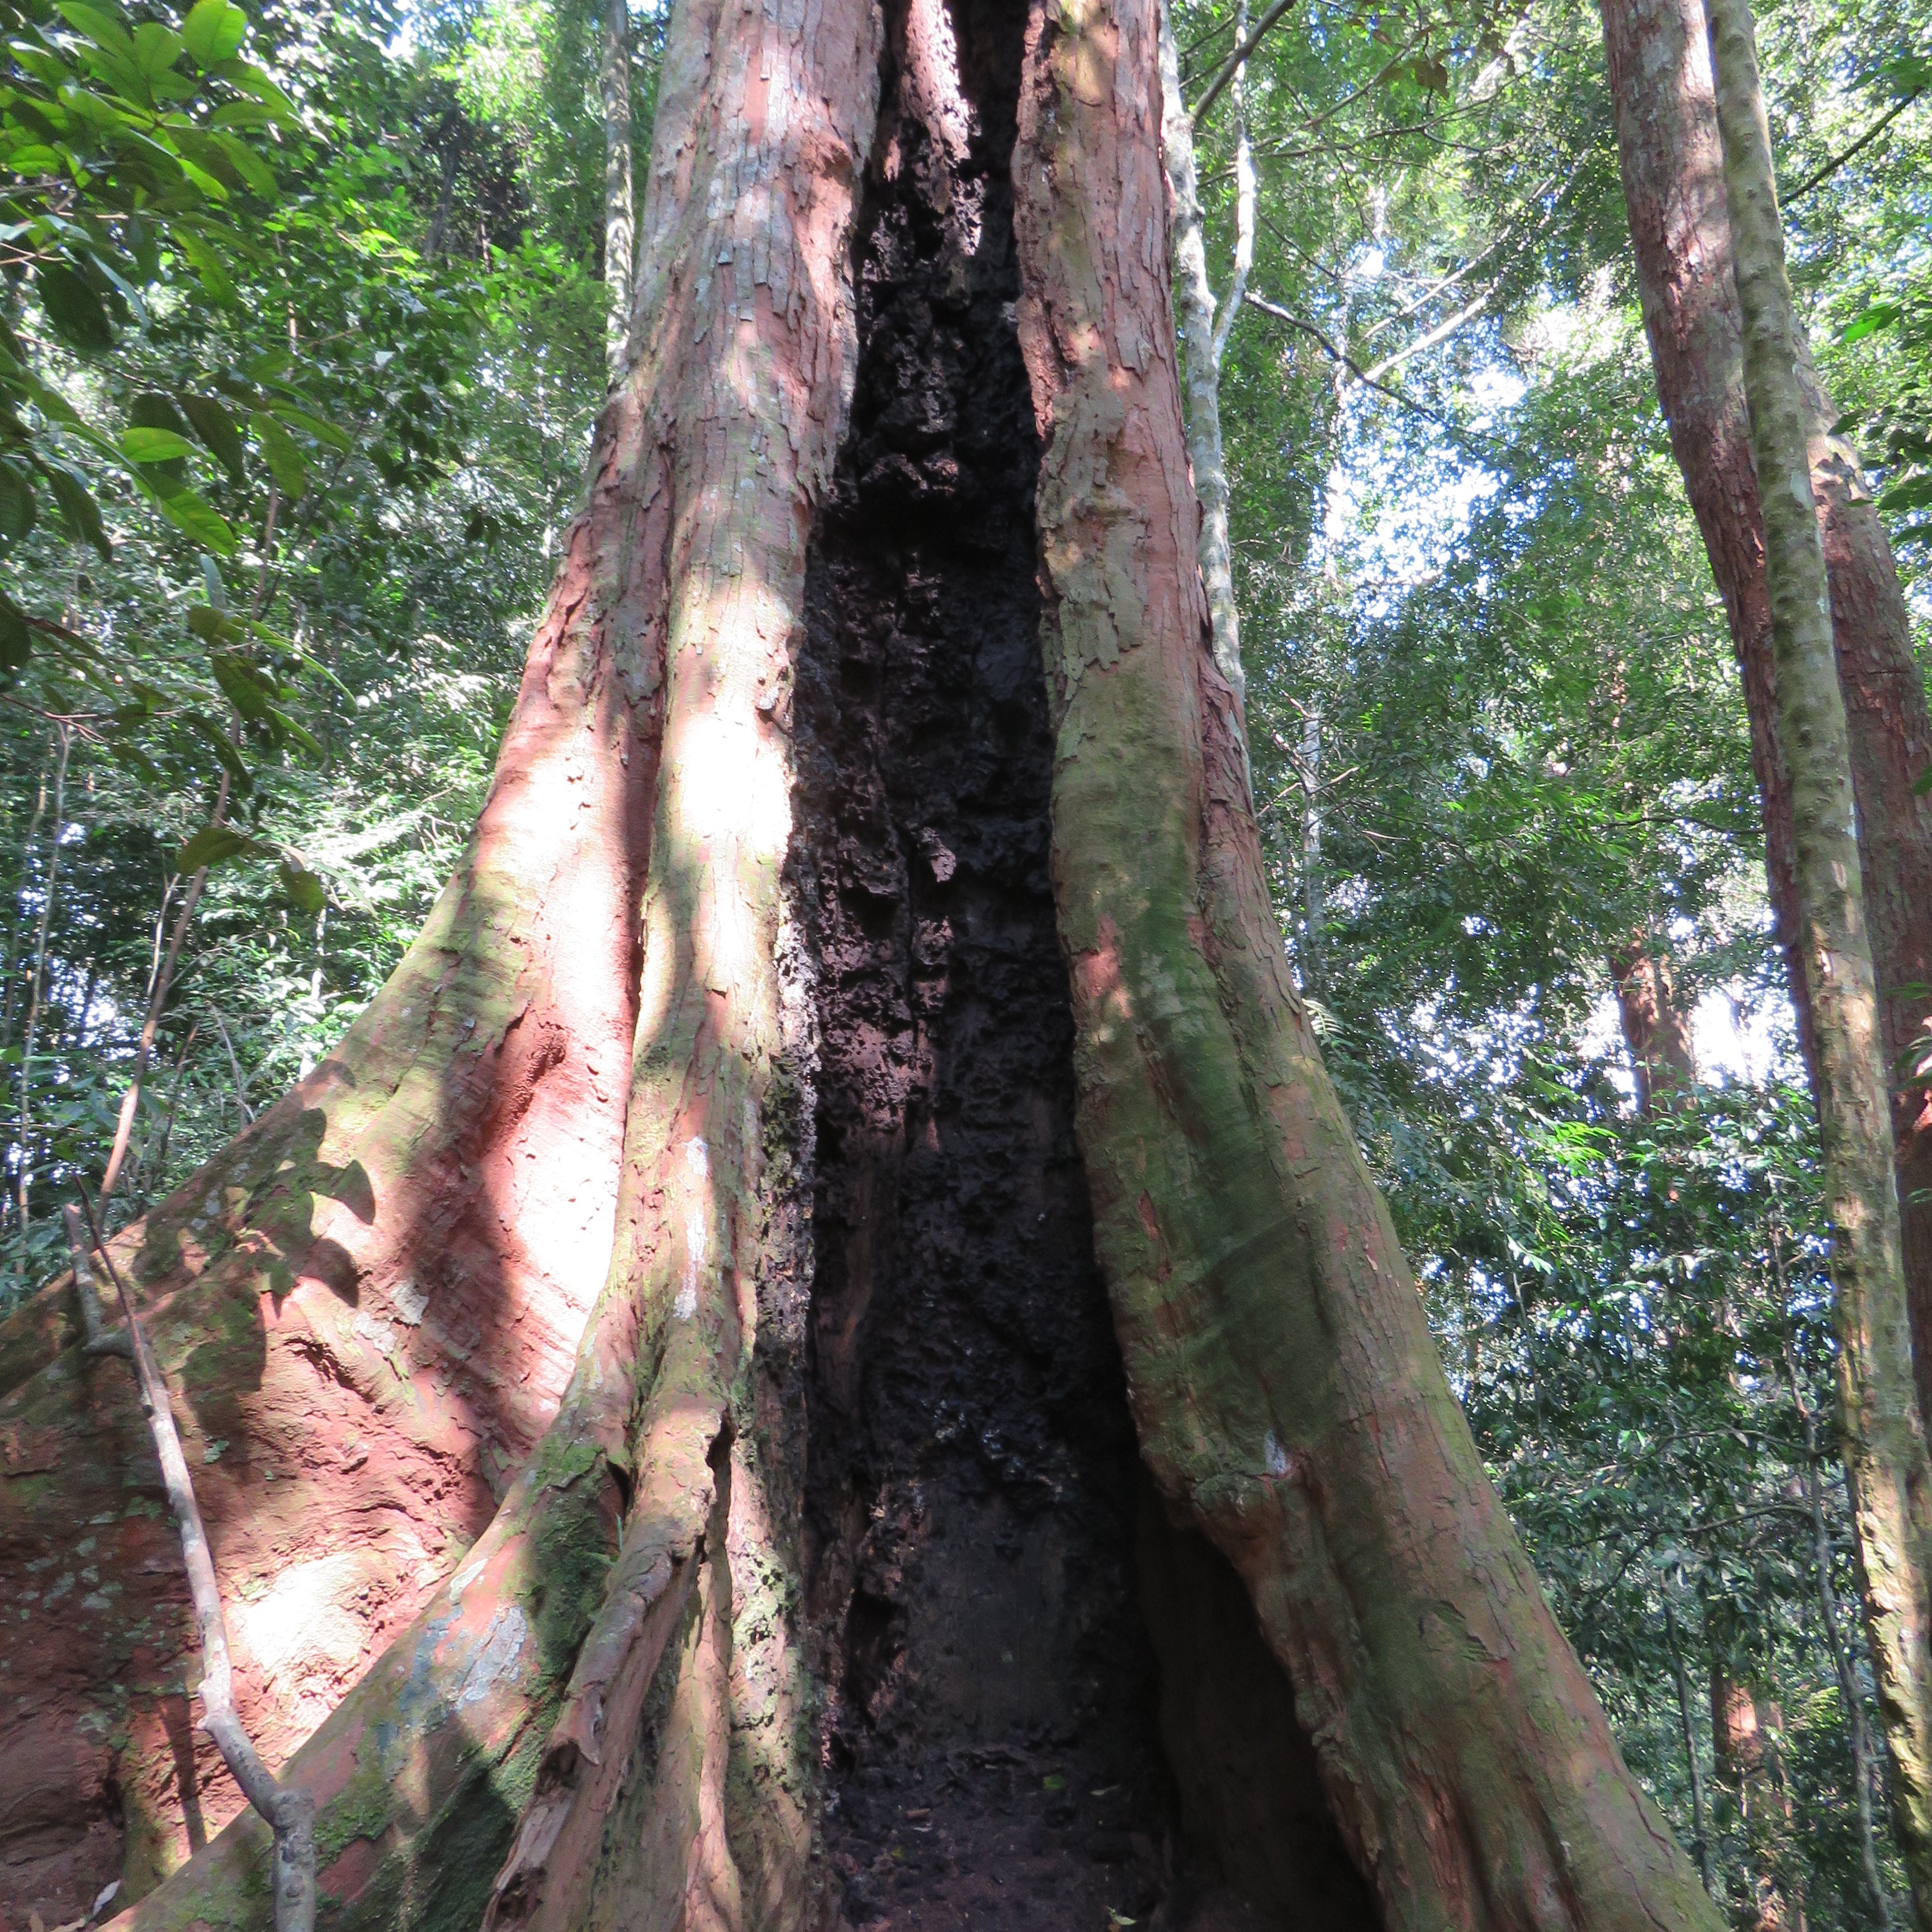 A tree hollowed out by termites